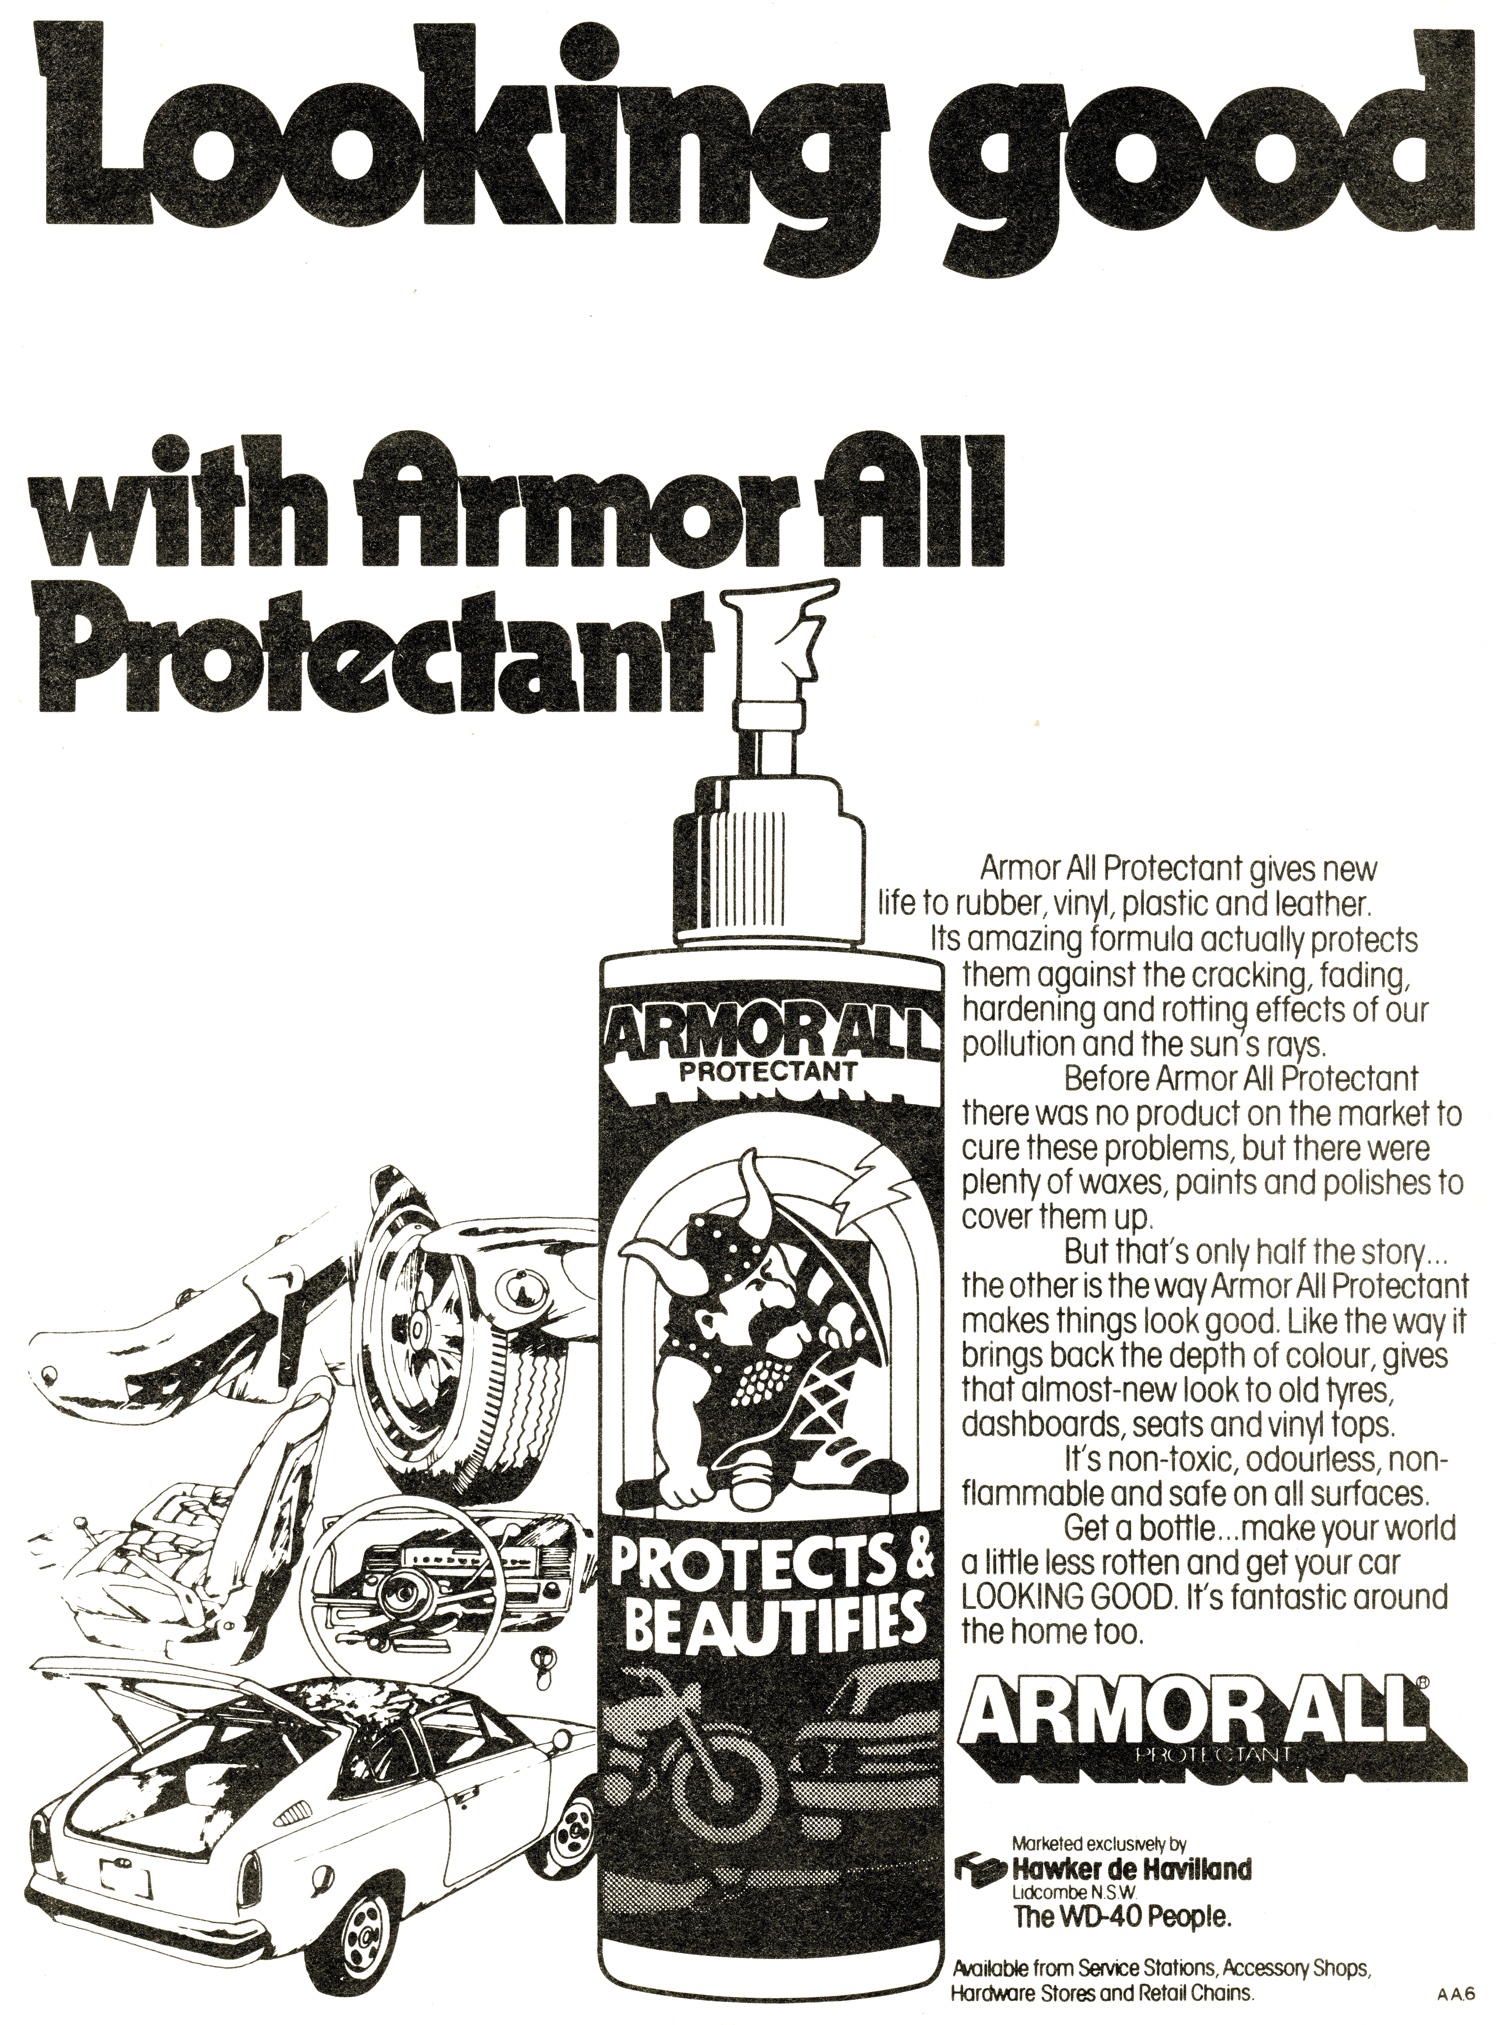 1977 Armor All Protectant